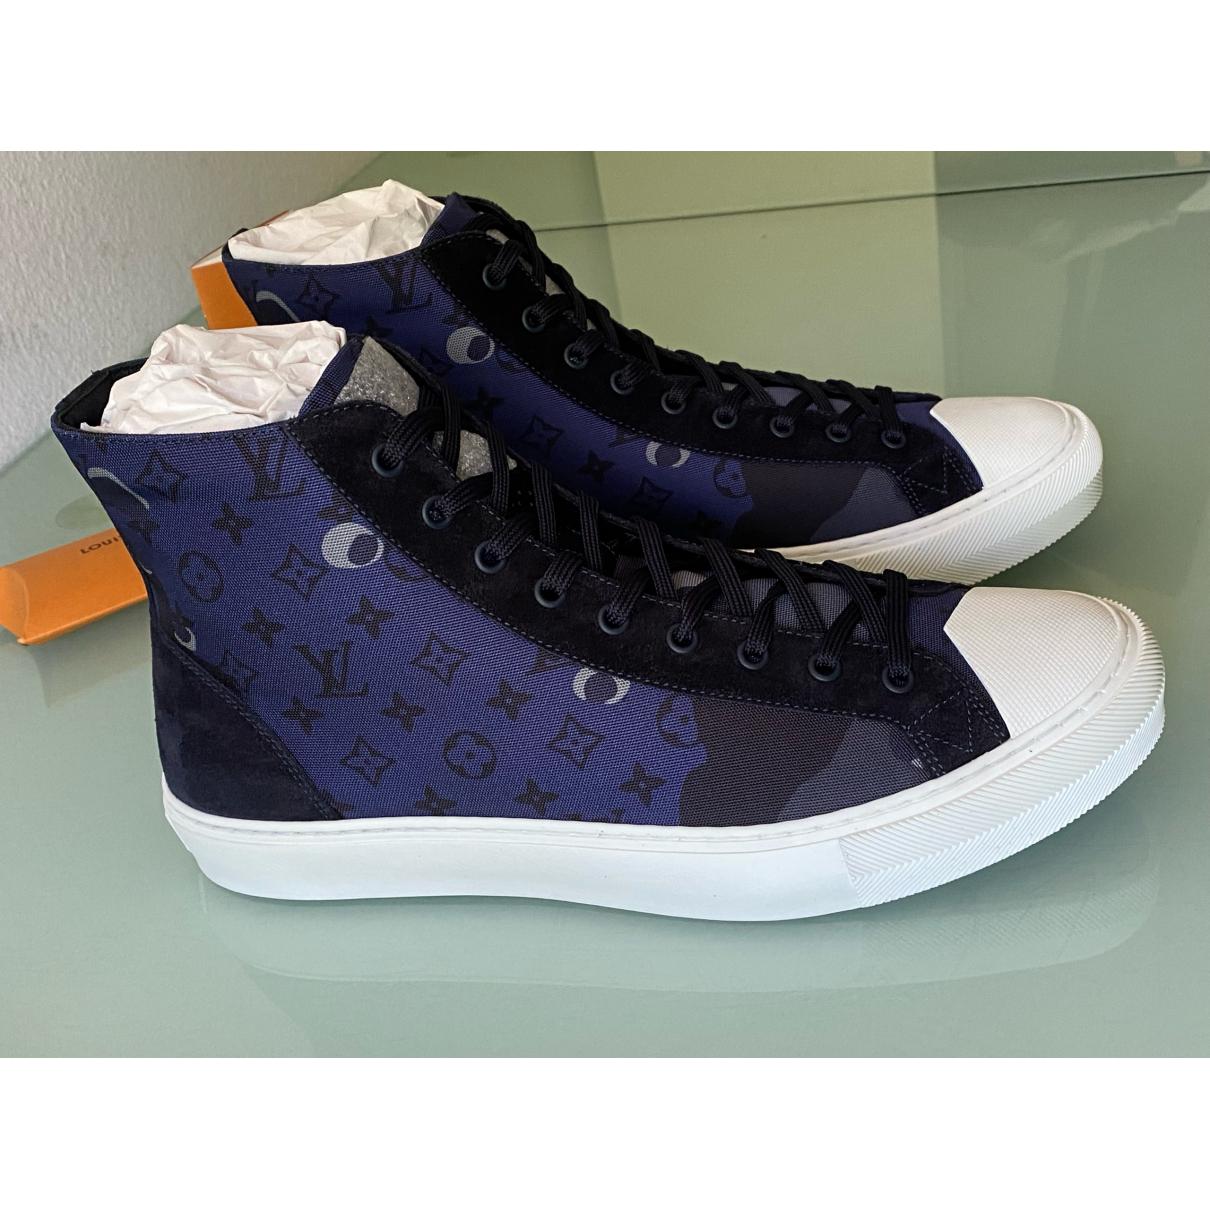 Tattoo cloth high trainers Louis Vuitton Navy size 9.5 UK in